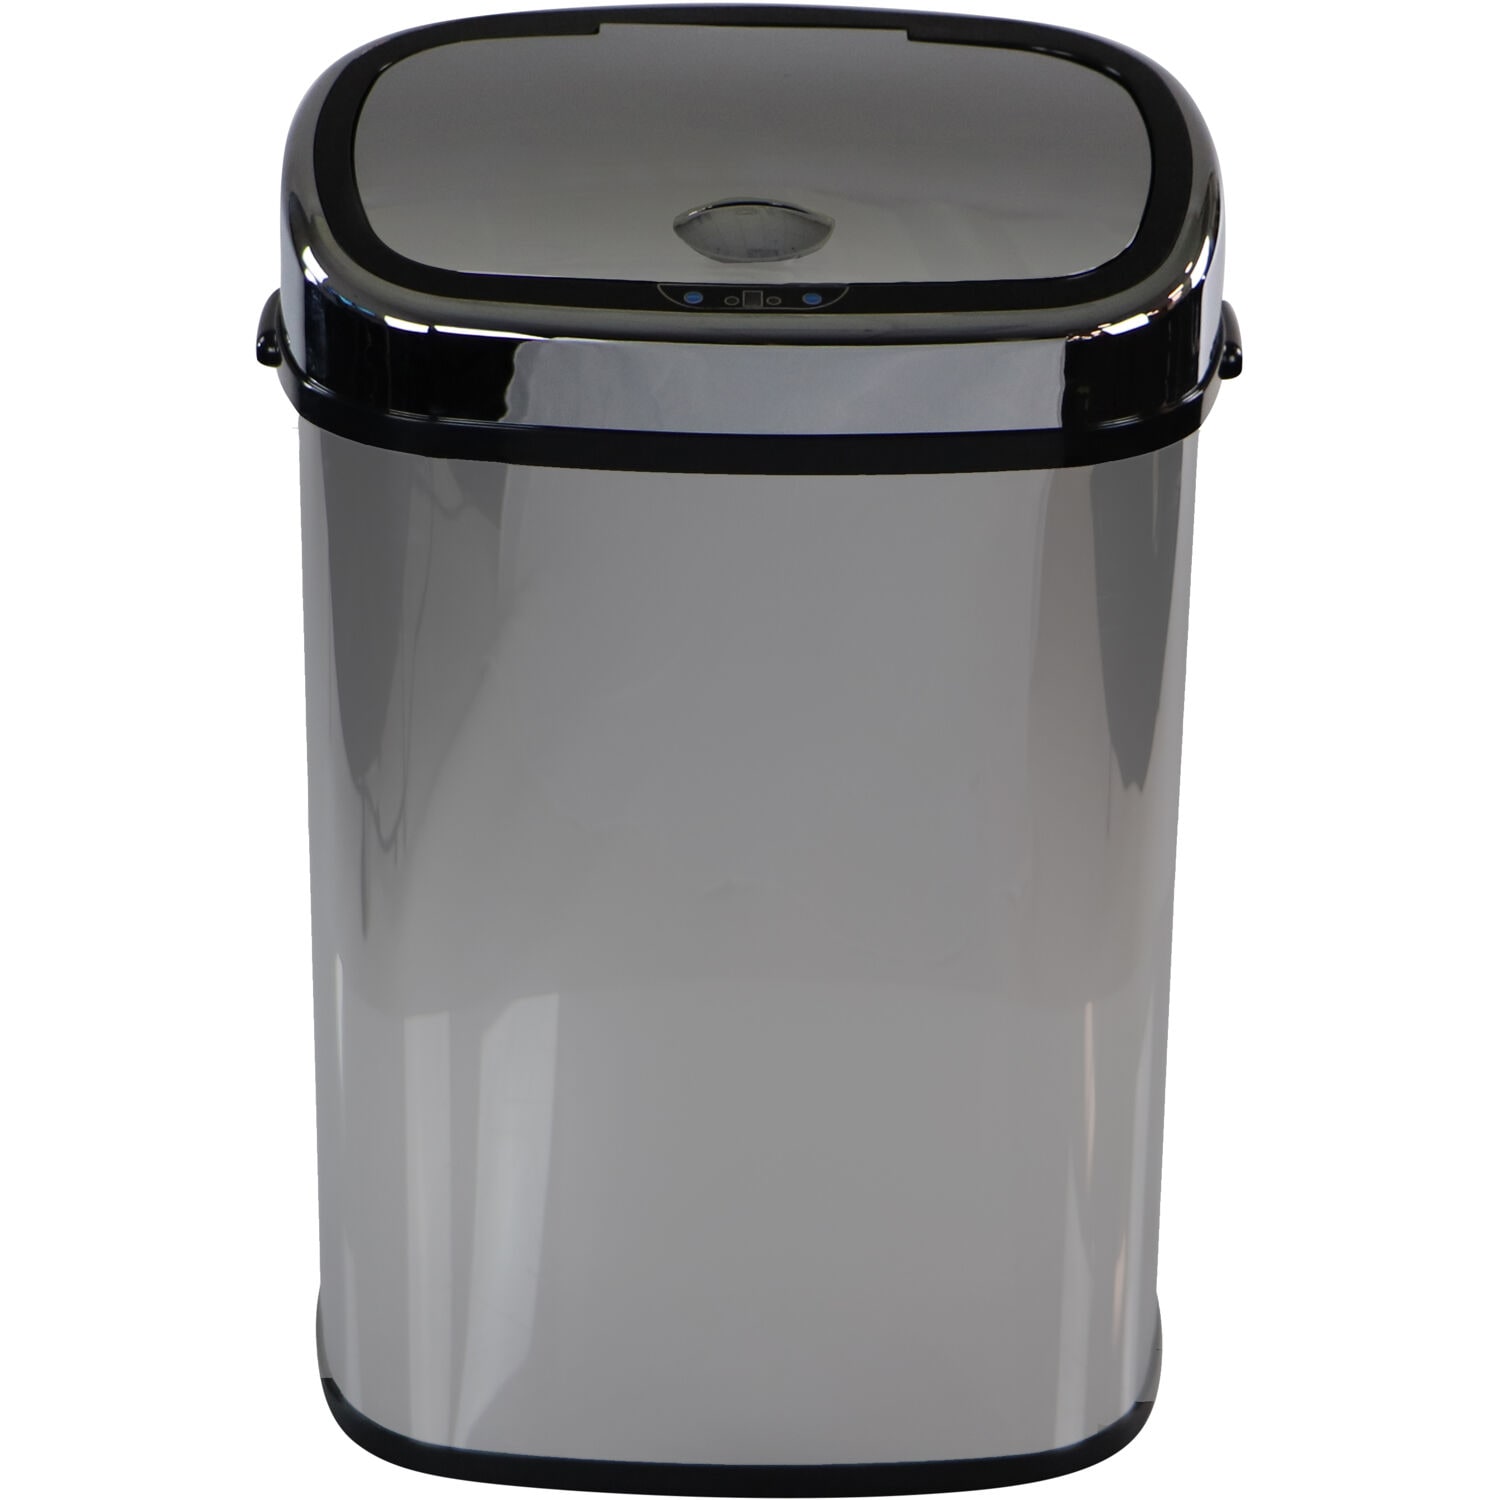 50 Litre Stainless Steel Automatic Auto Sensor Touchless Chrome Waste Dust Bin 